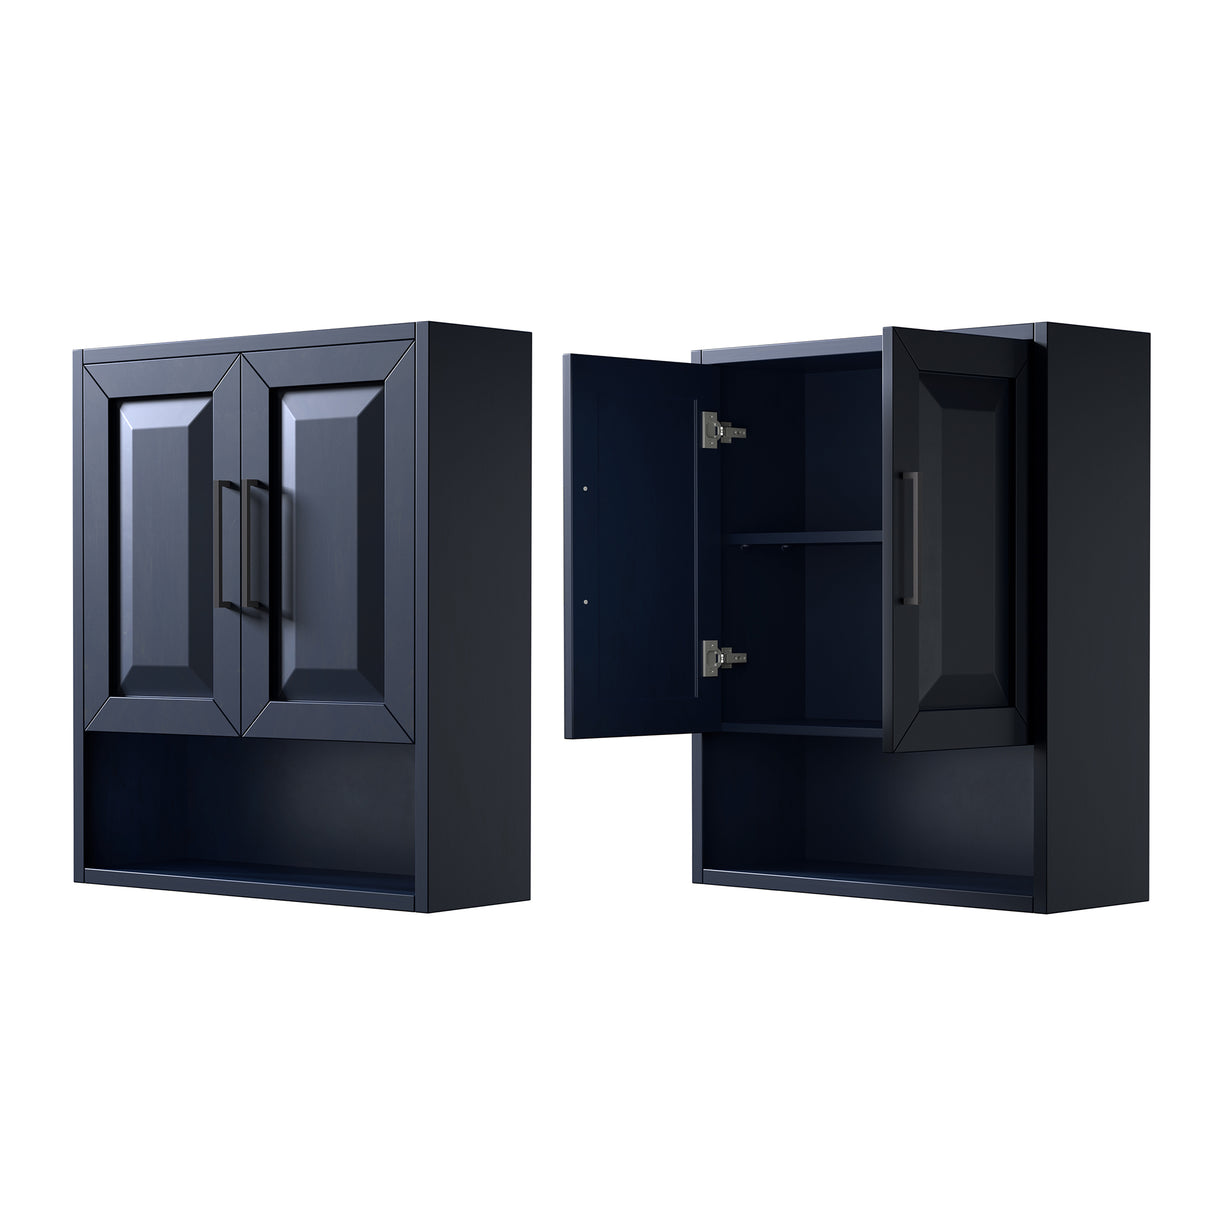 Daria Over-the-Toilet Bathroom Wall-Mounted Storage Cabinet in Dark Blue with Matte Black Trim